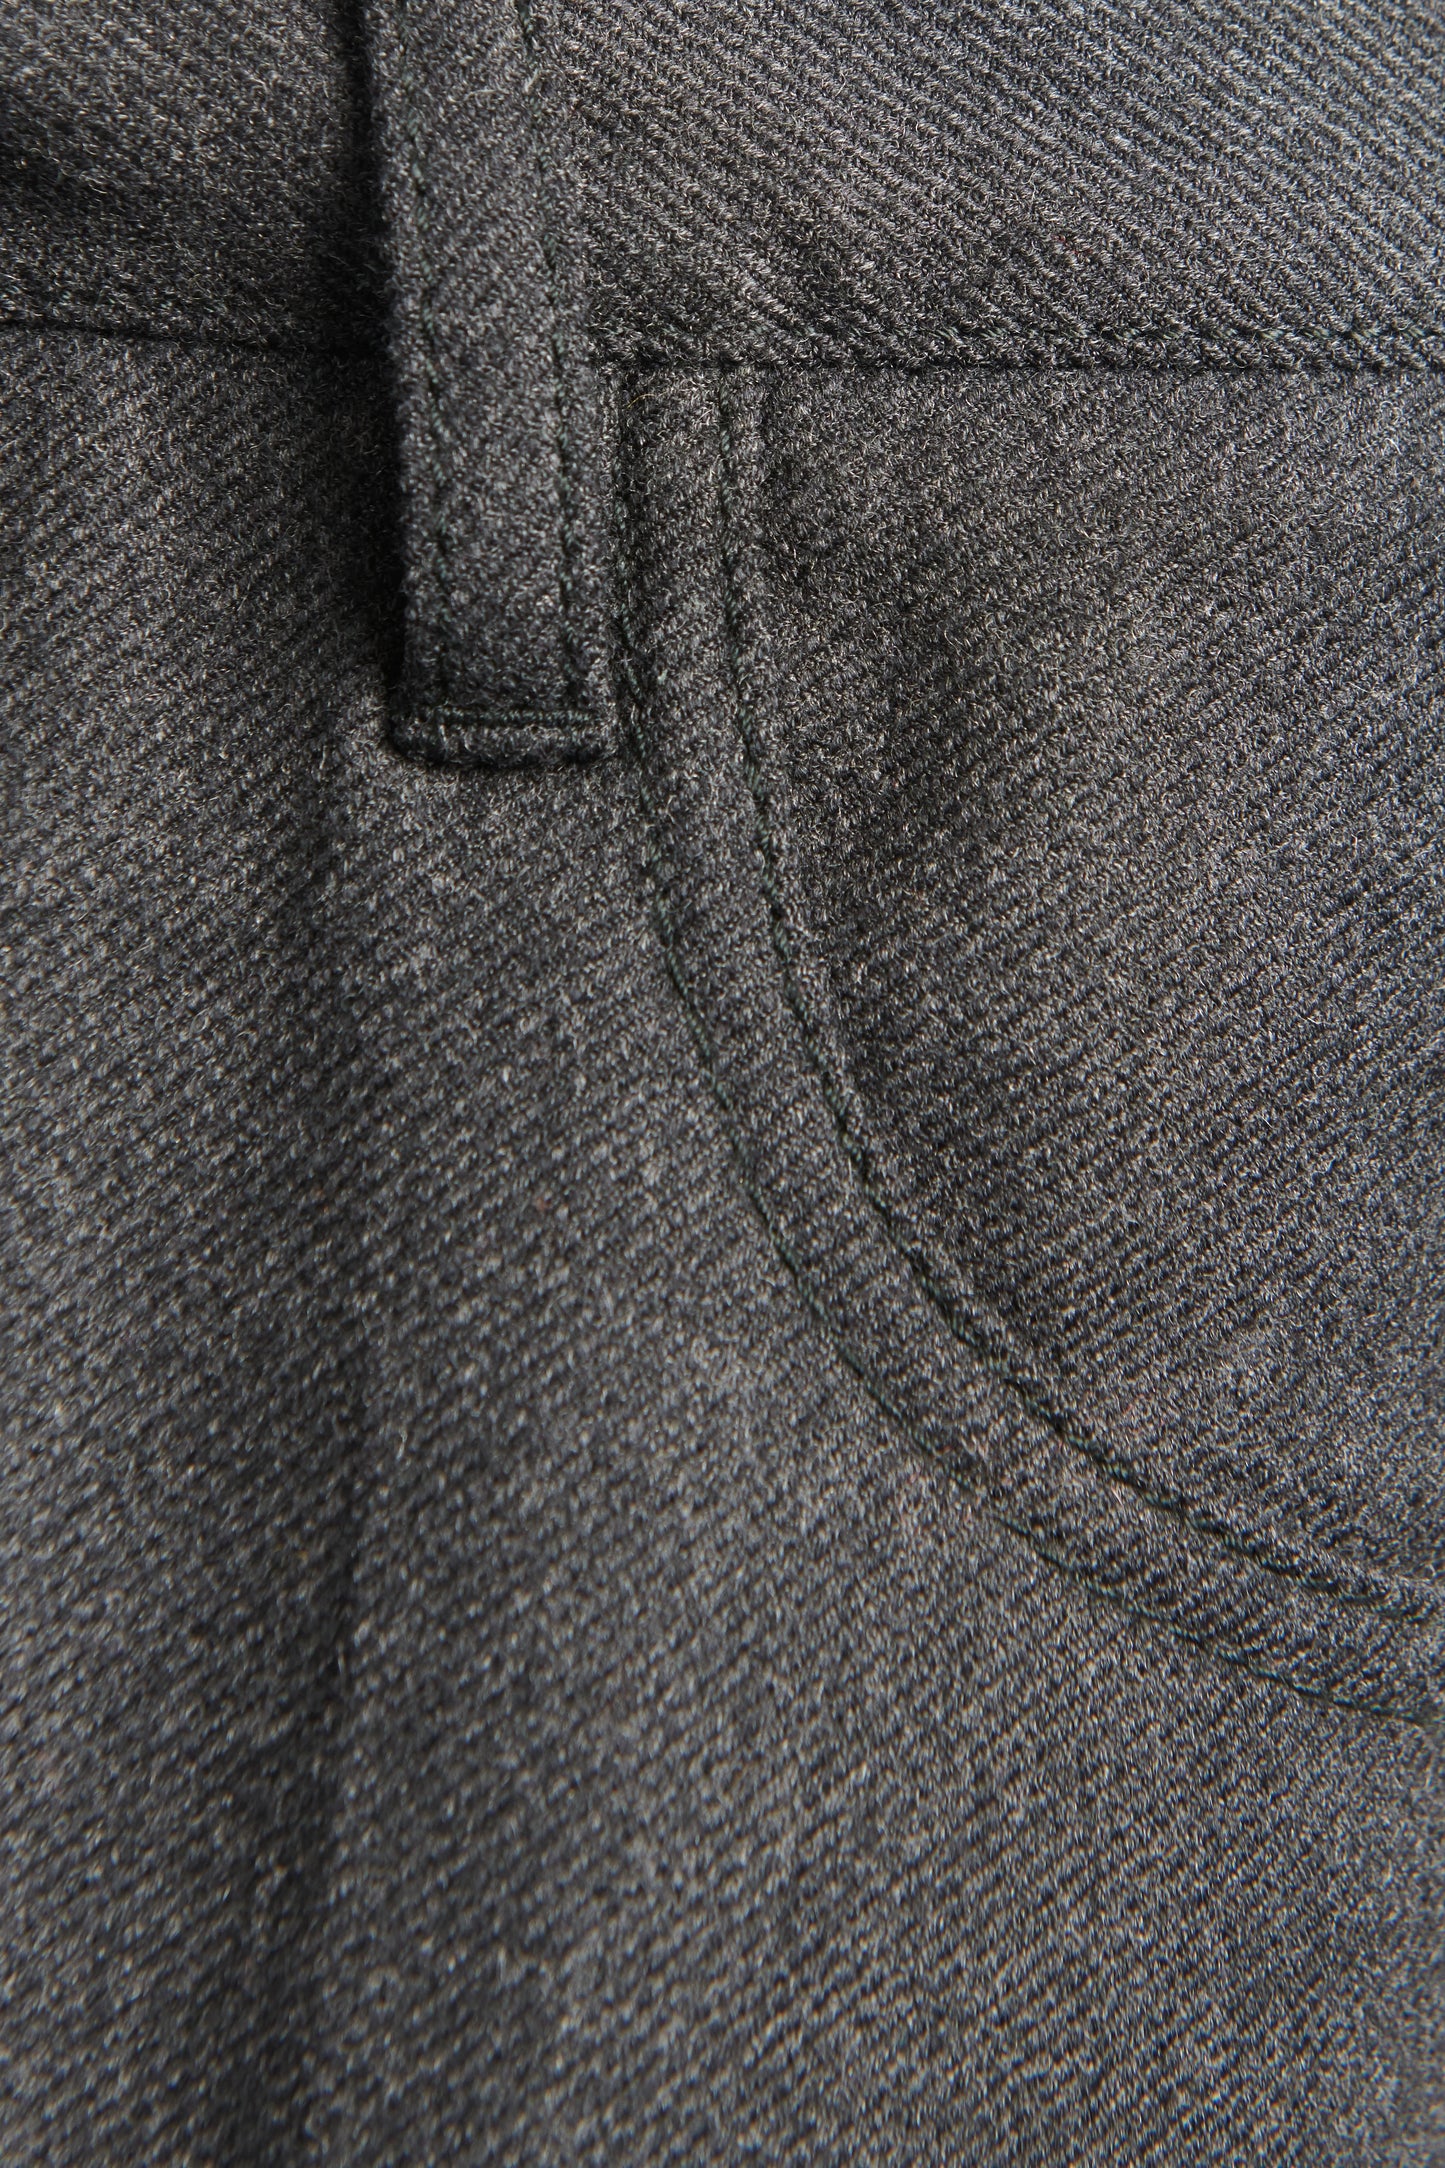 Grey Wool Preowned Trousers